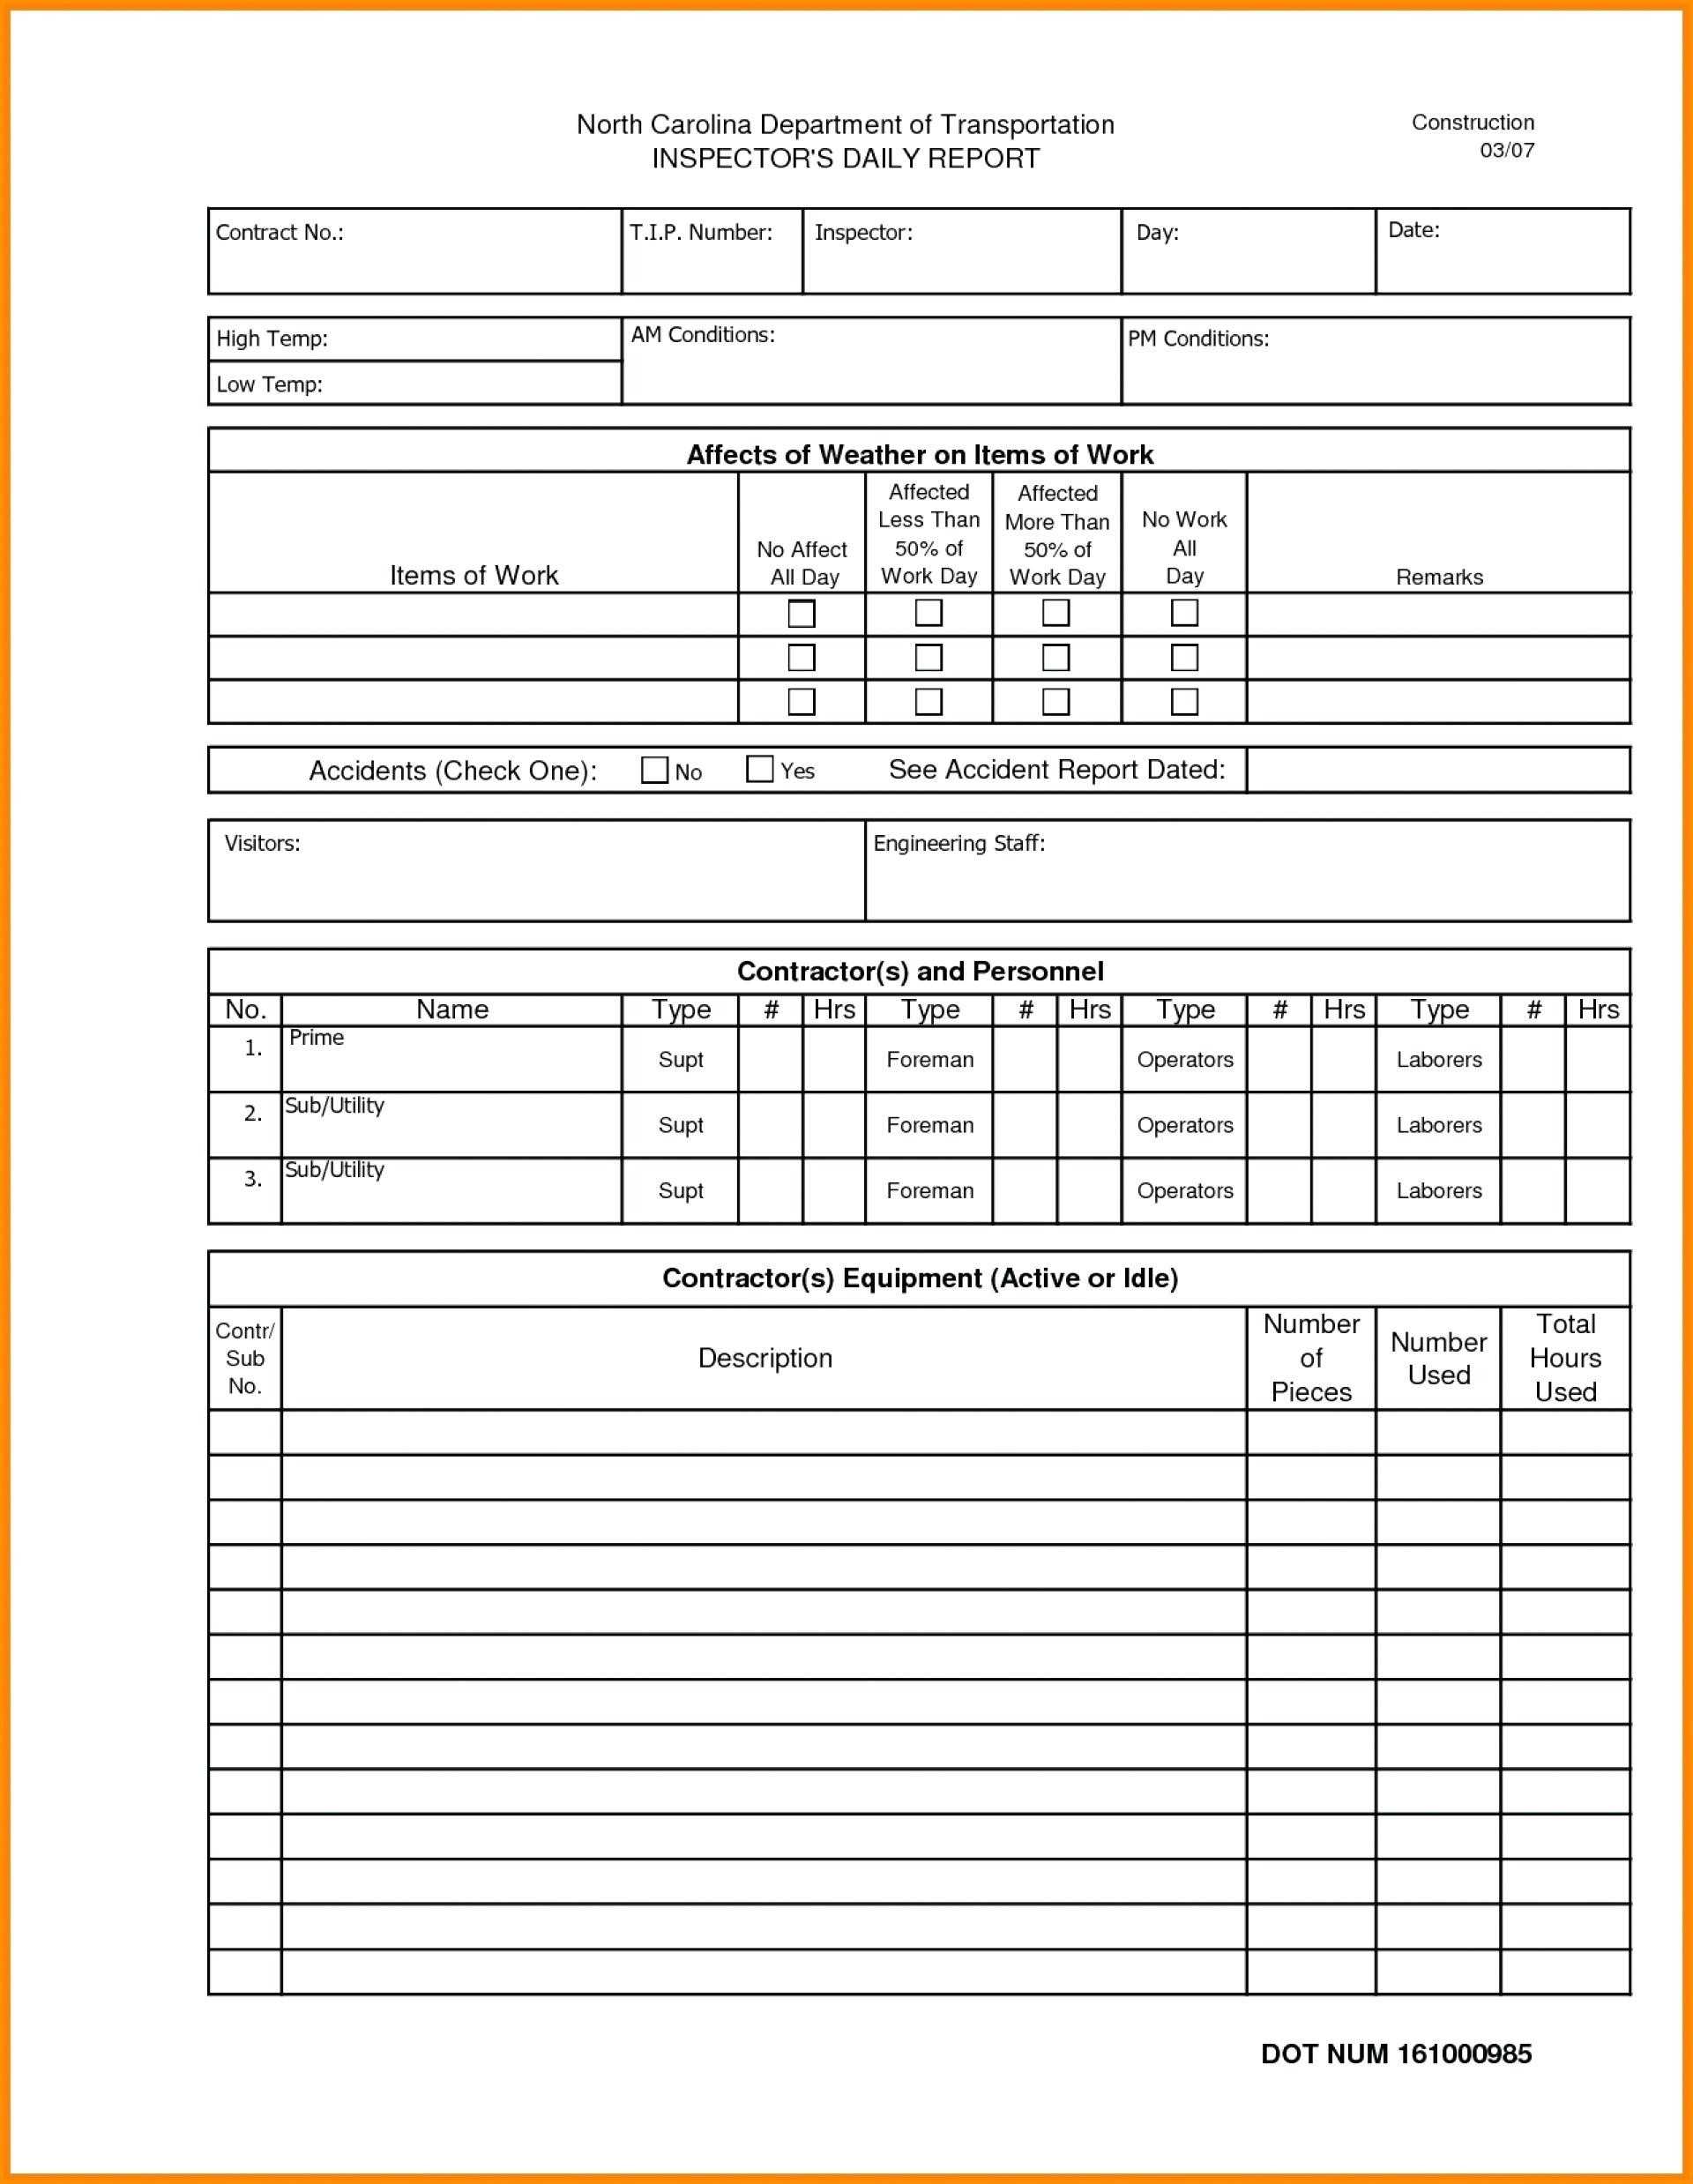 027 Construction Cost Report Template Excel Of Beautiful In Construction Cost Report Template